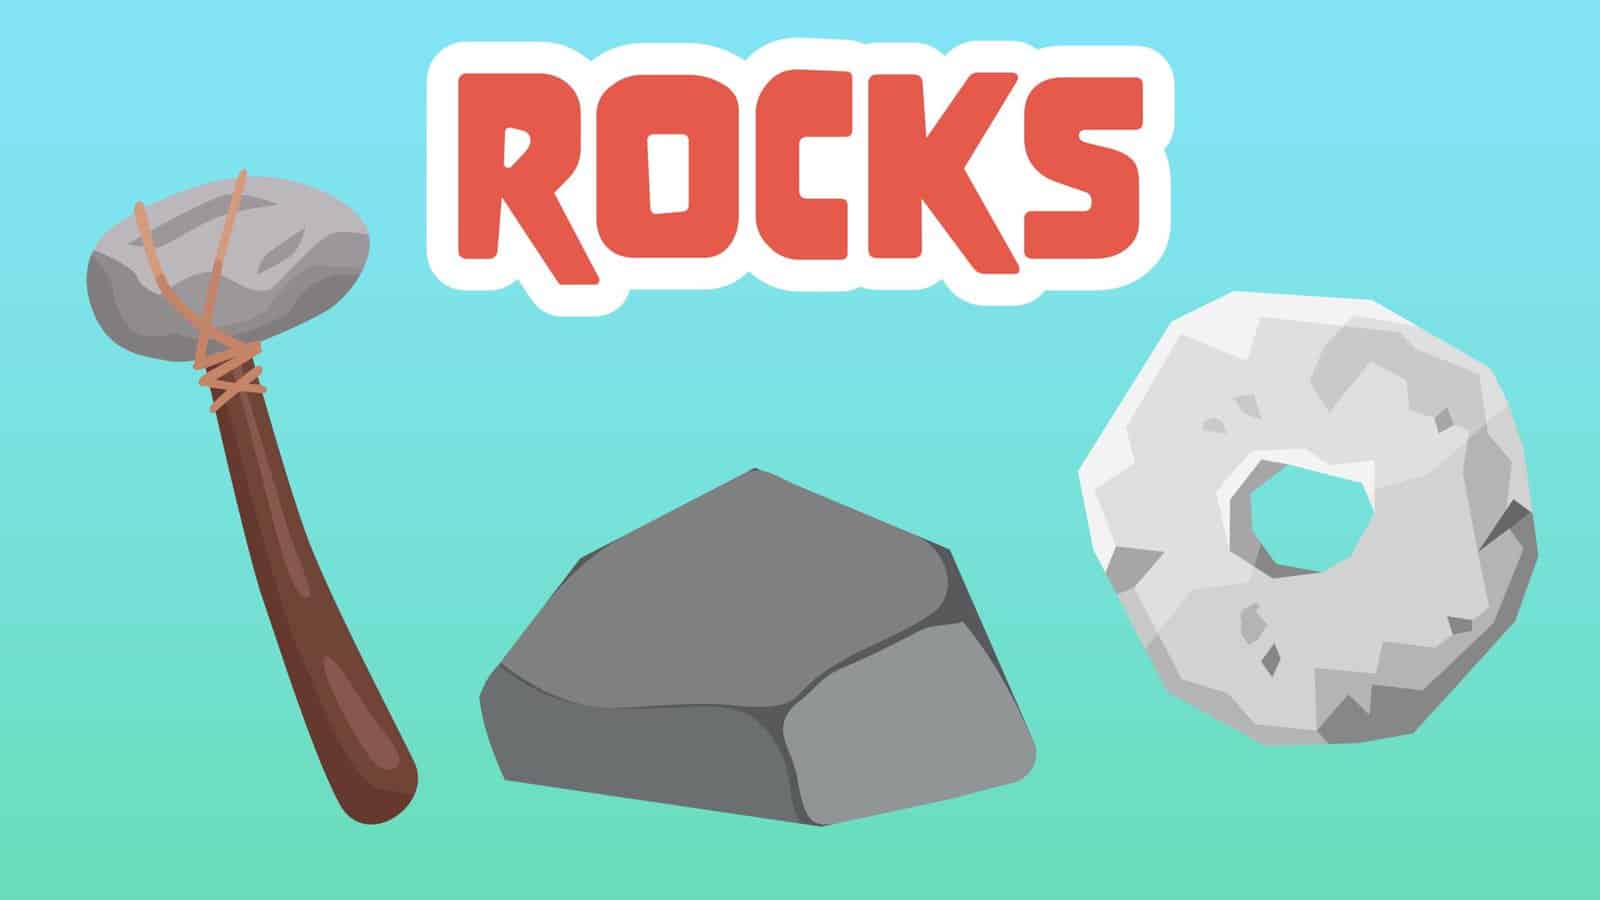 Top 10 Facts About Rocks! - Fun Kids - the UK's children's radio